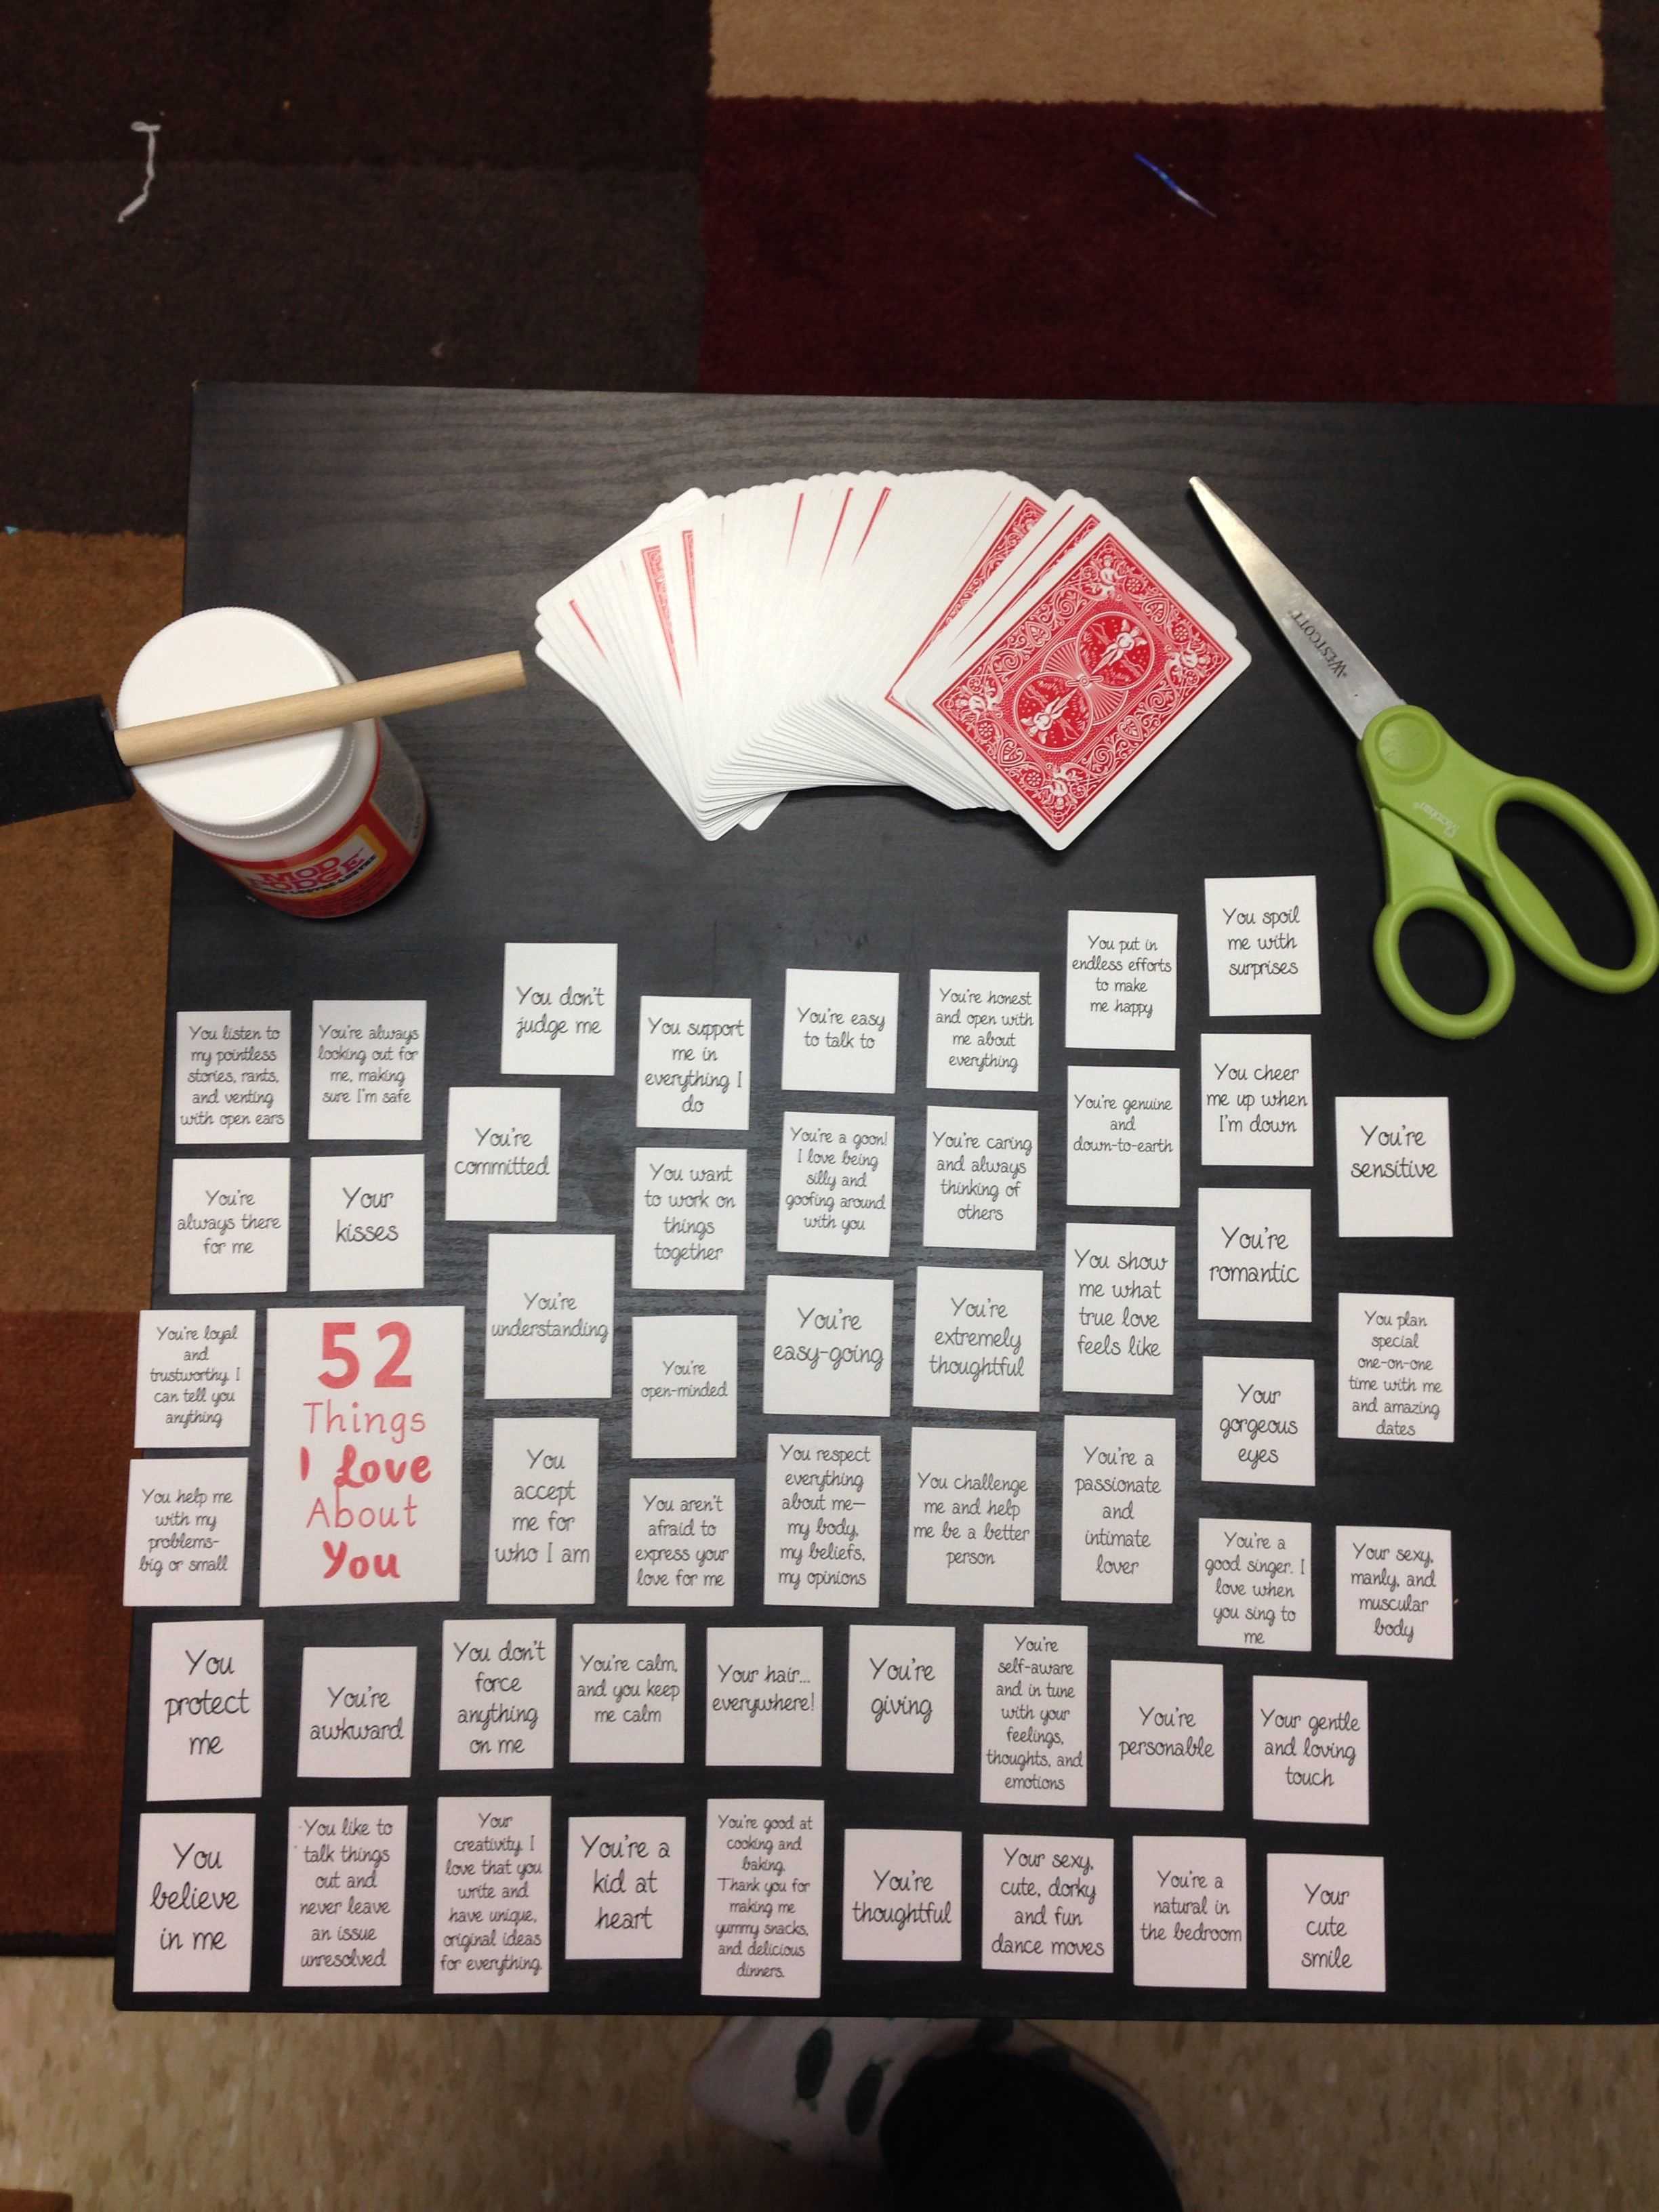 52 Things I Love About You" Make A Table On Microsoft Word Inside 52 Things I Love About You Deck Of Cards Template